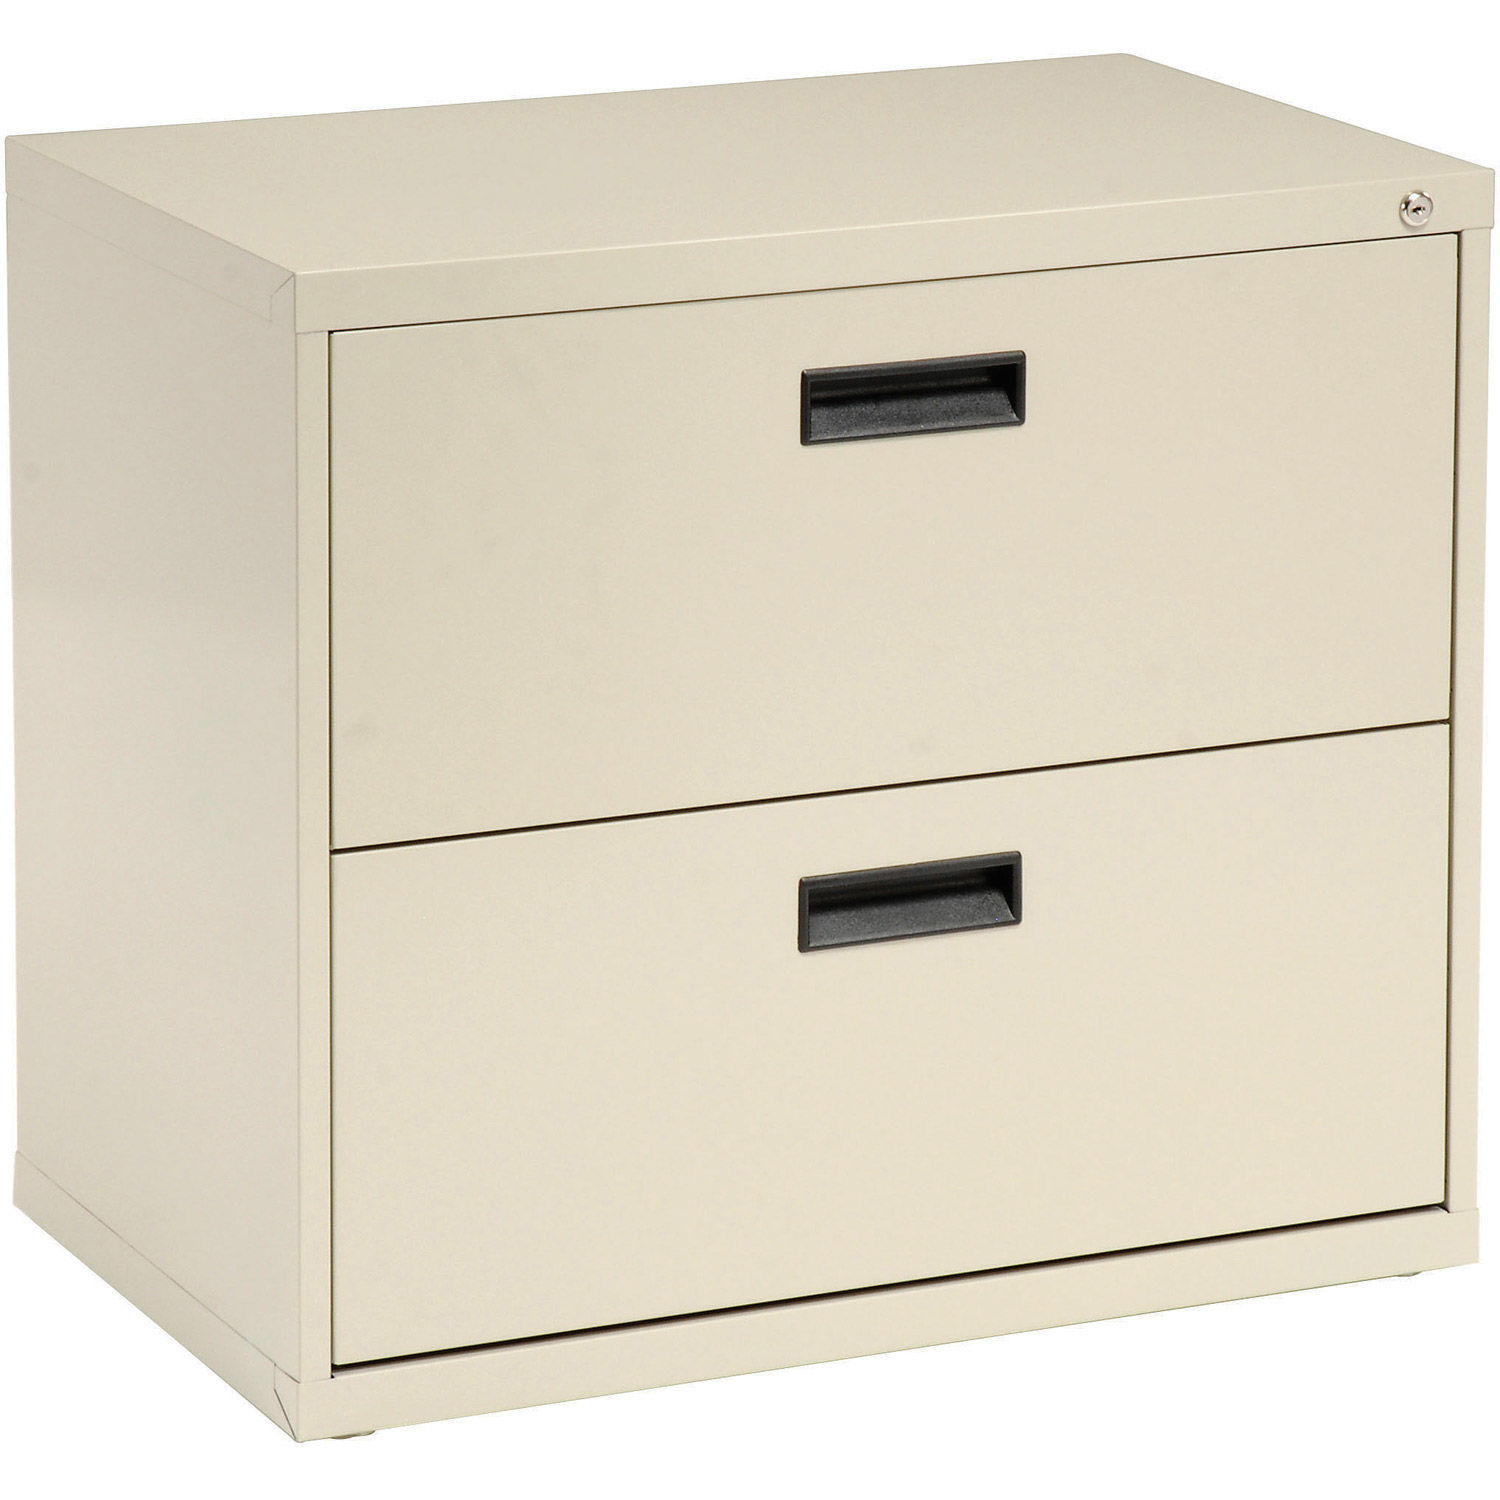 30 W Lateral File Cabinet 2 Drawer Putty 707022019569 Ebay